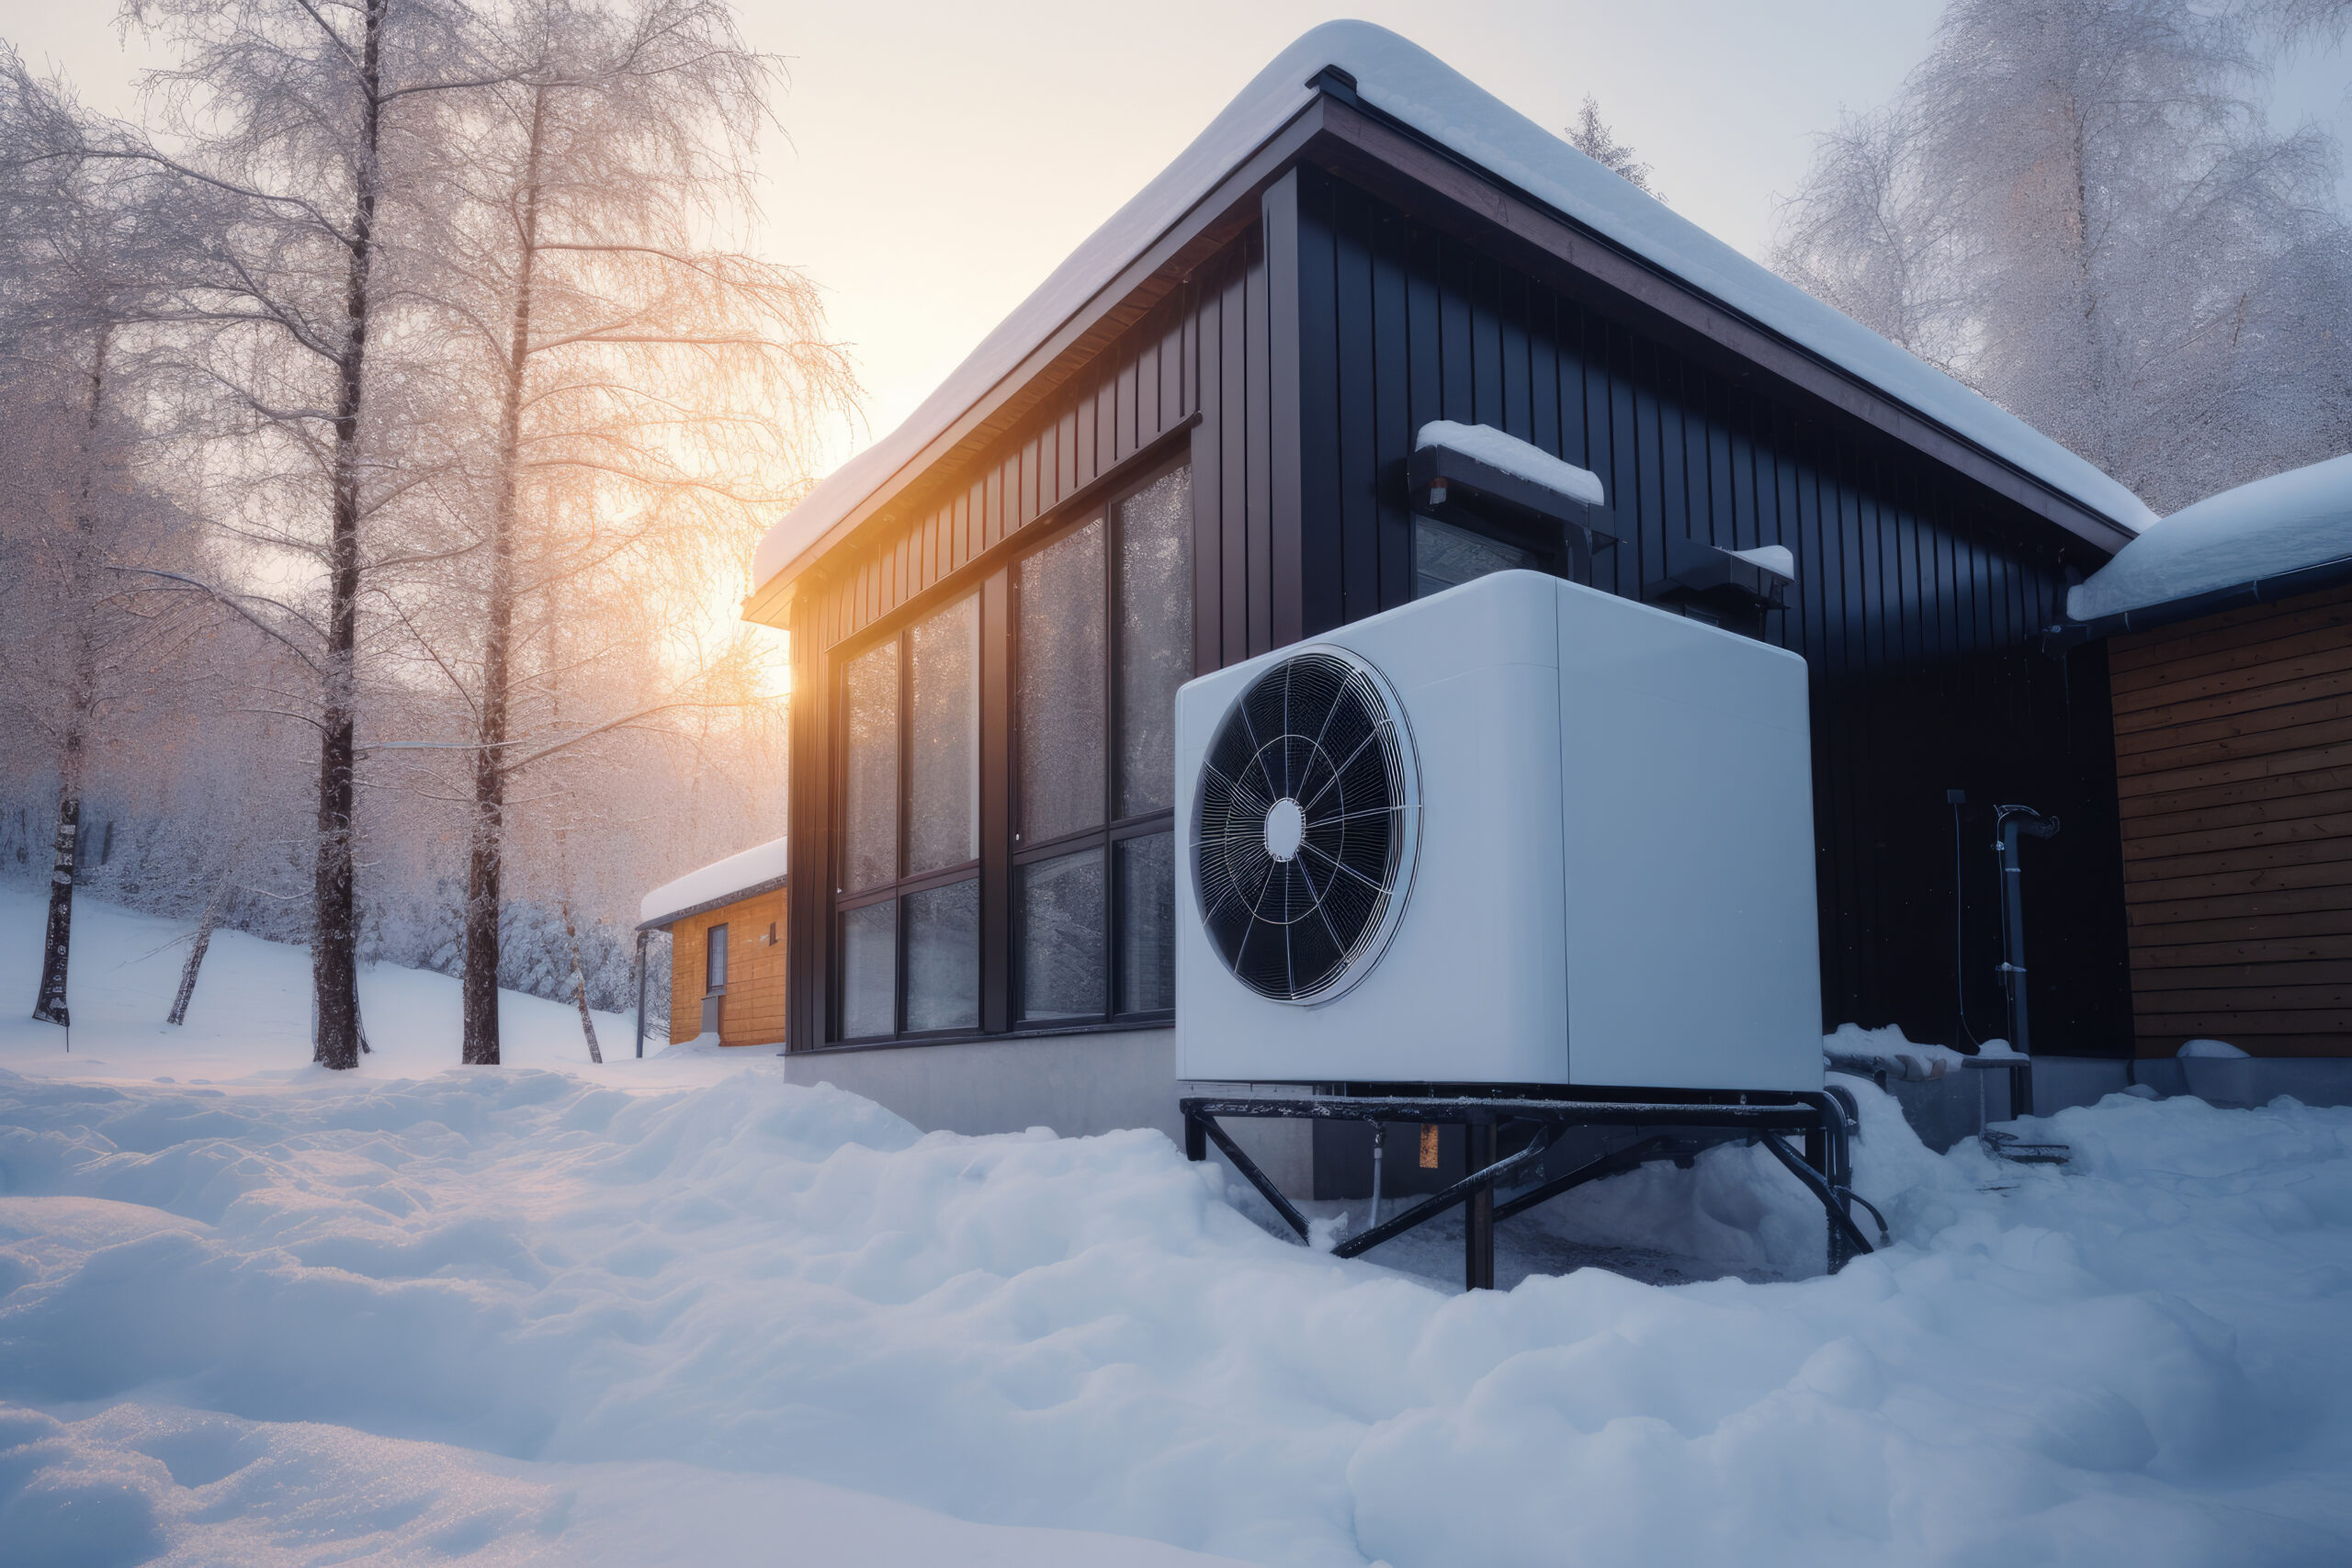 heat pump outside of a snow covered house, winter time, generati